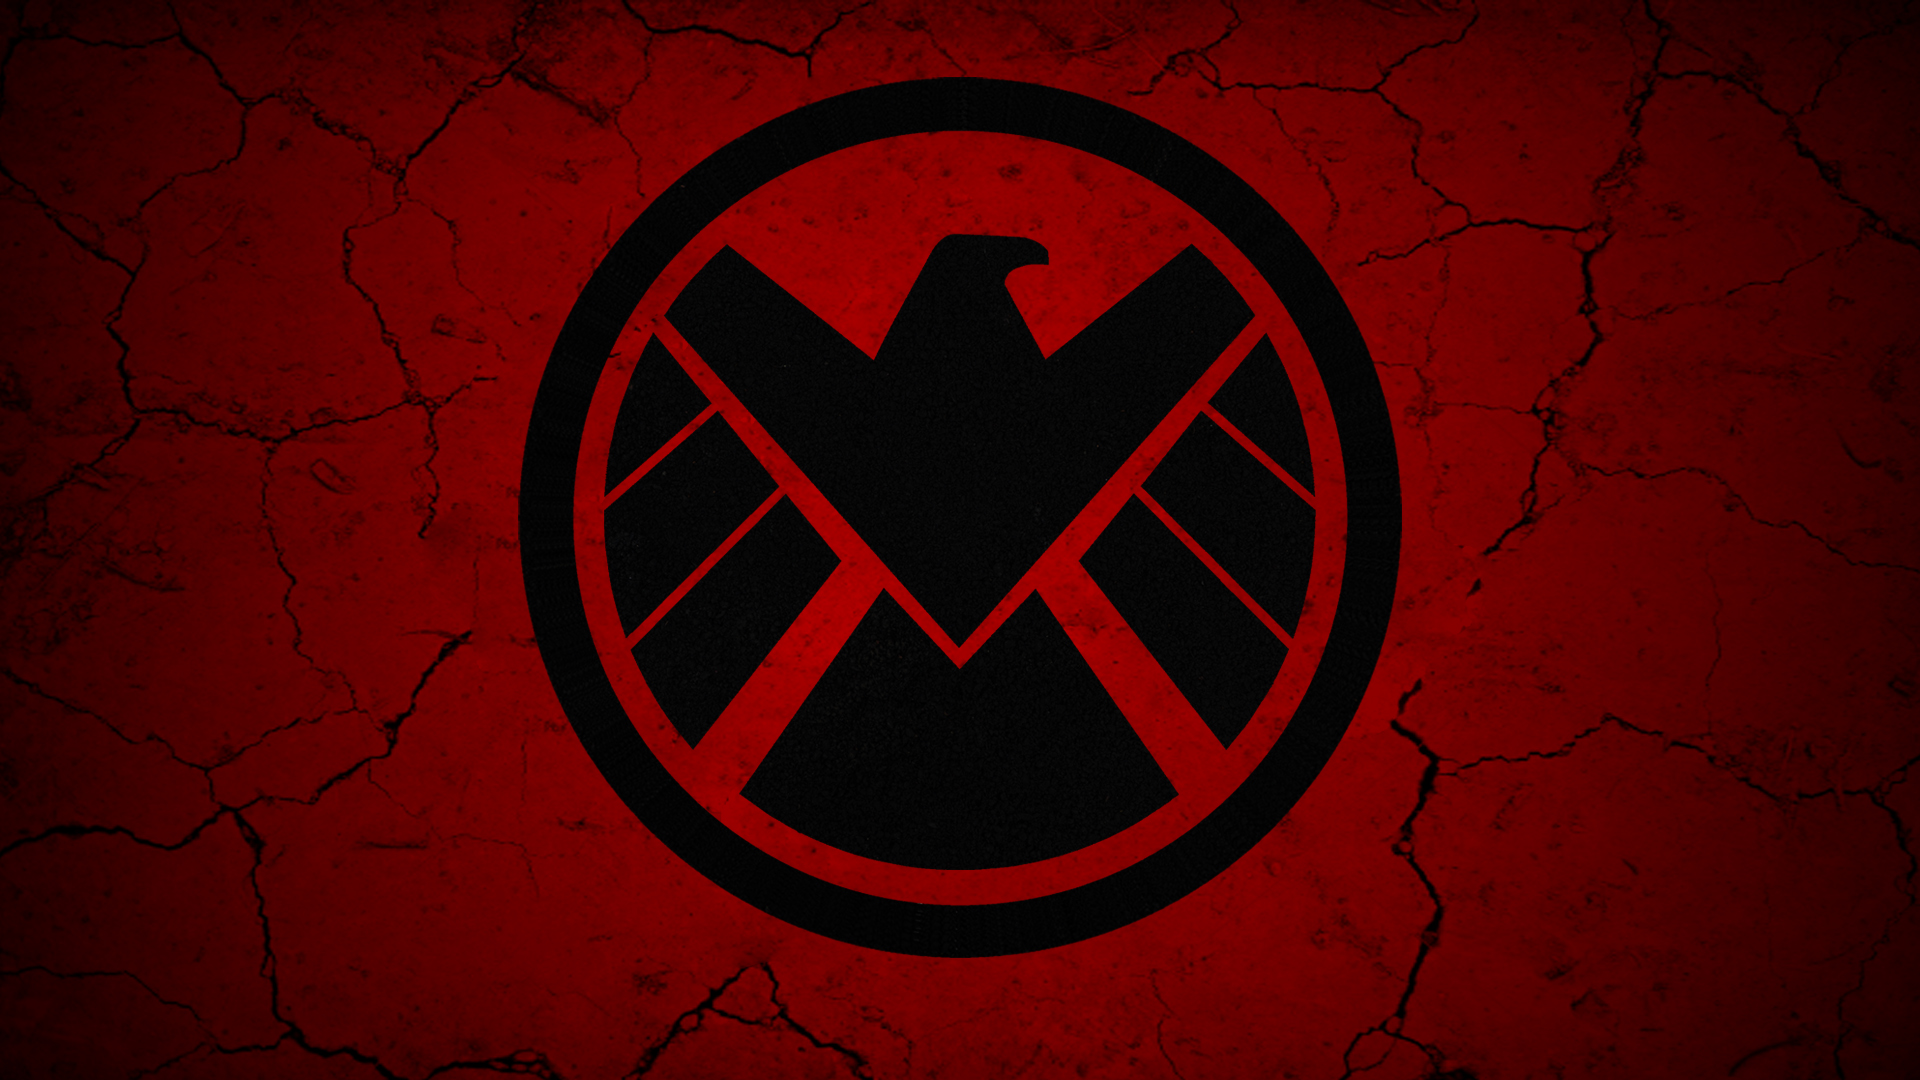 agents of shield season 2 wallpaper 1920x1080 by masteroffunny d8467ud